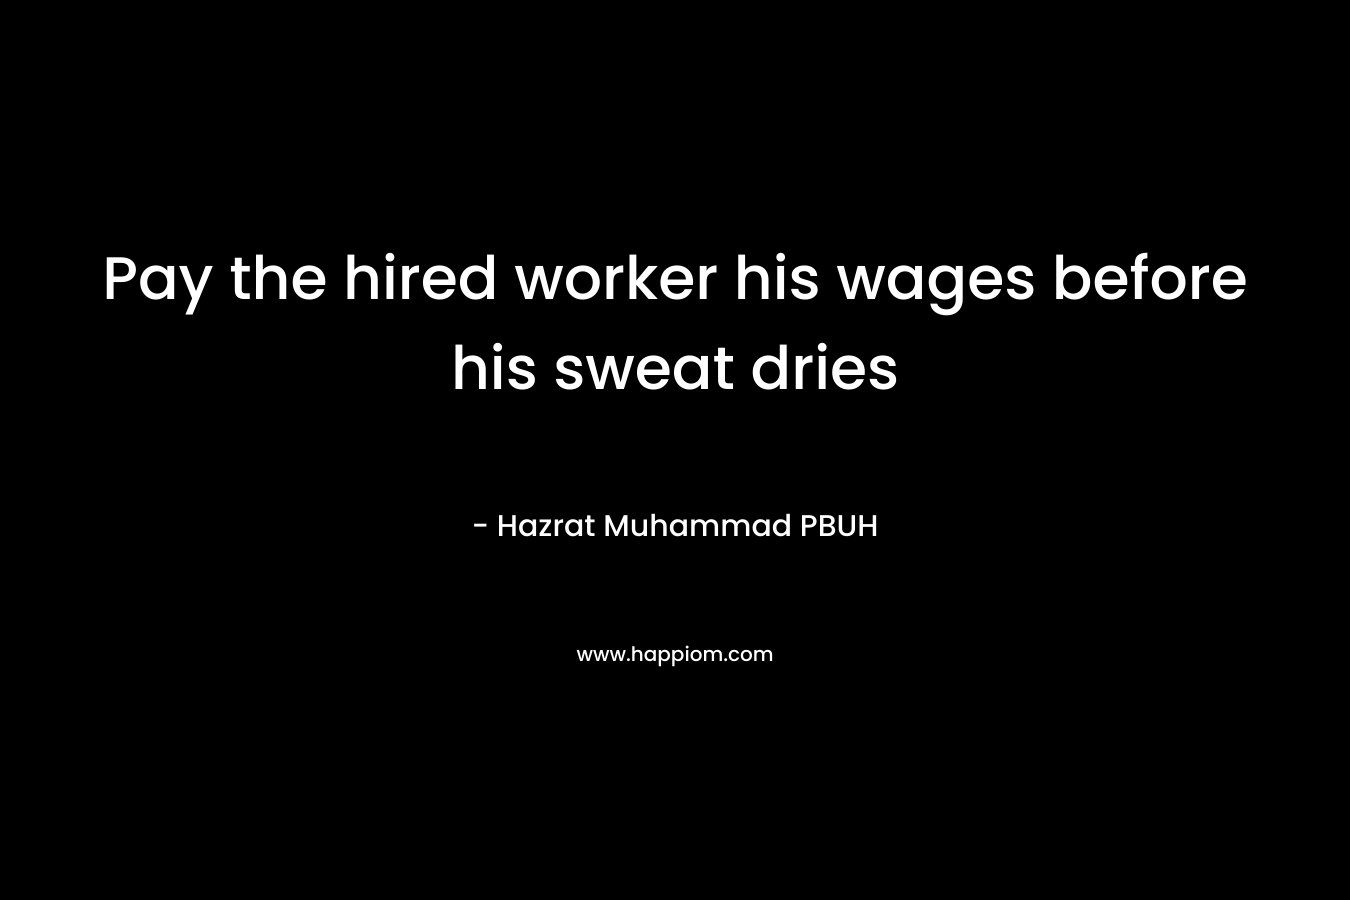 Pay the hired worker his wages before his sweat dries – Hazrat Muhammad PBUH